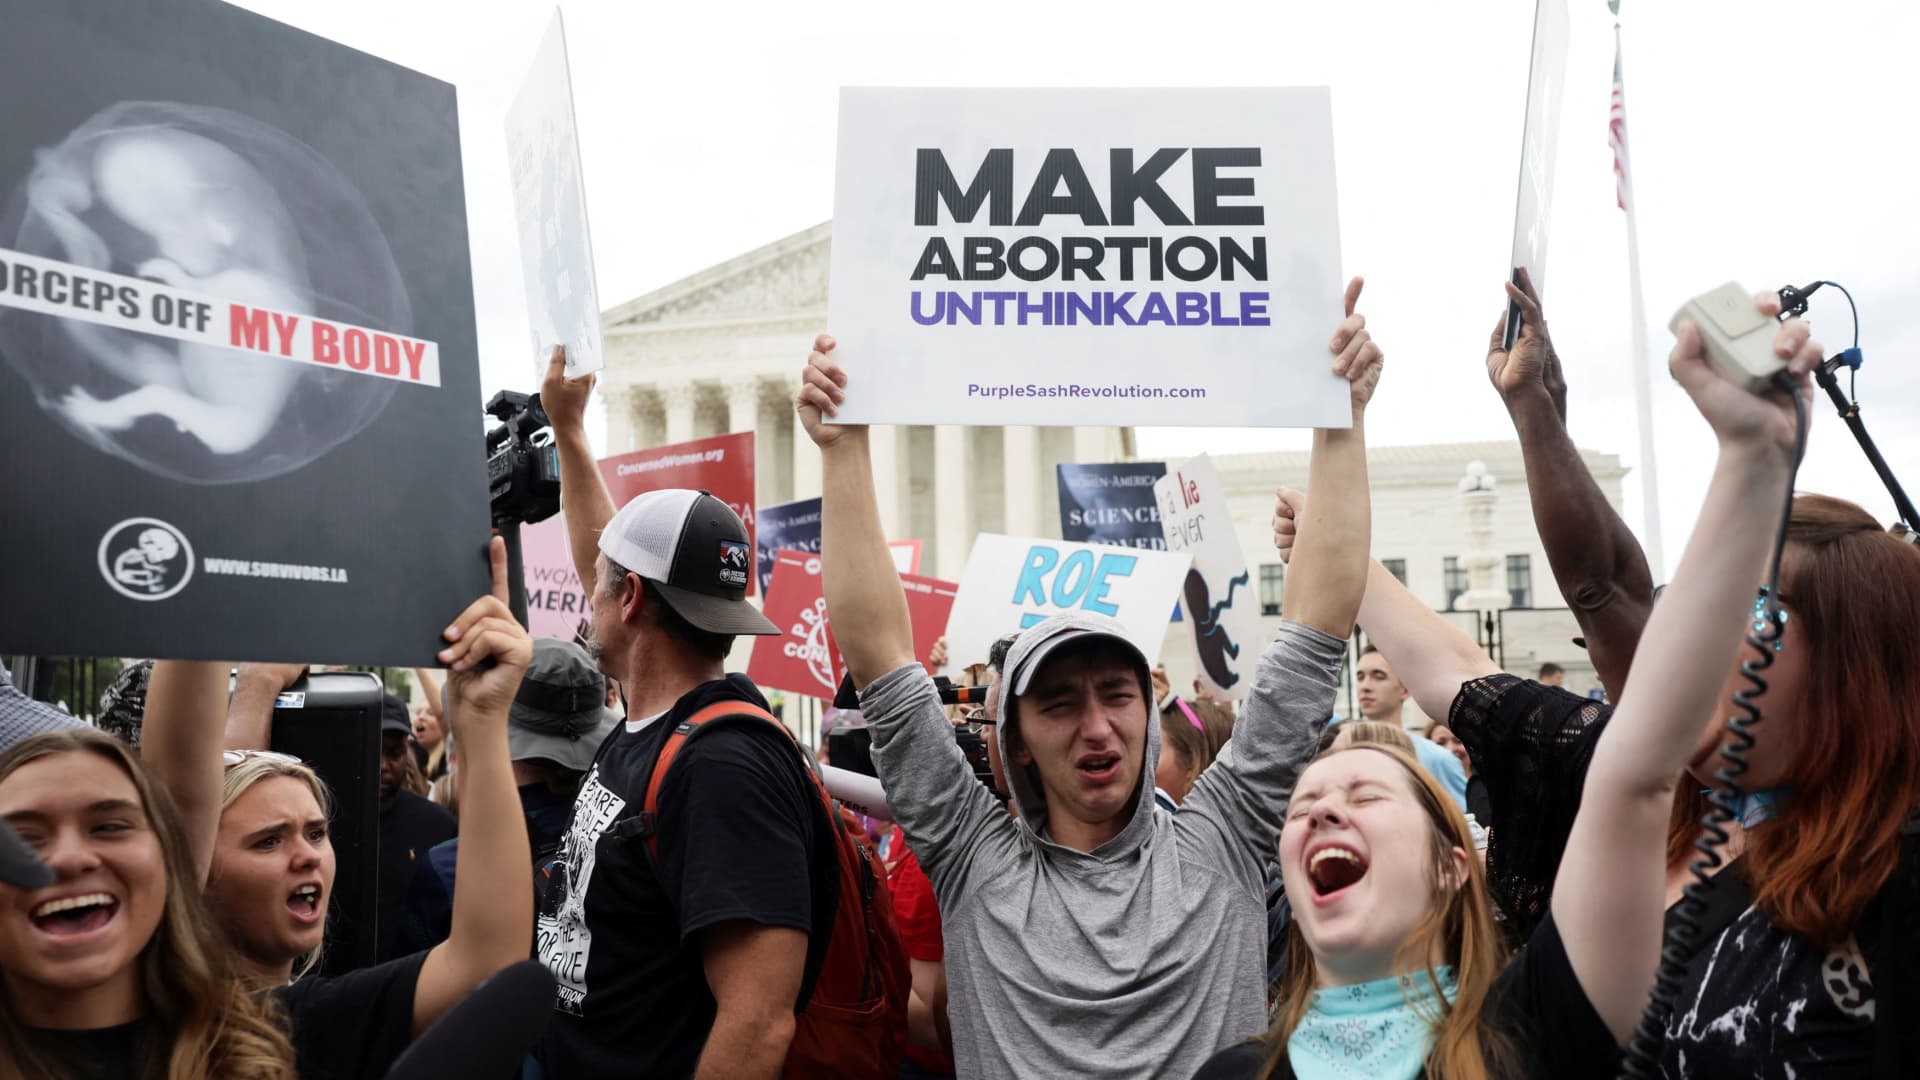 Anti-abortion group asks Supreme Court to keep mifepristone restrictions